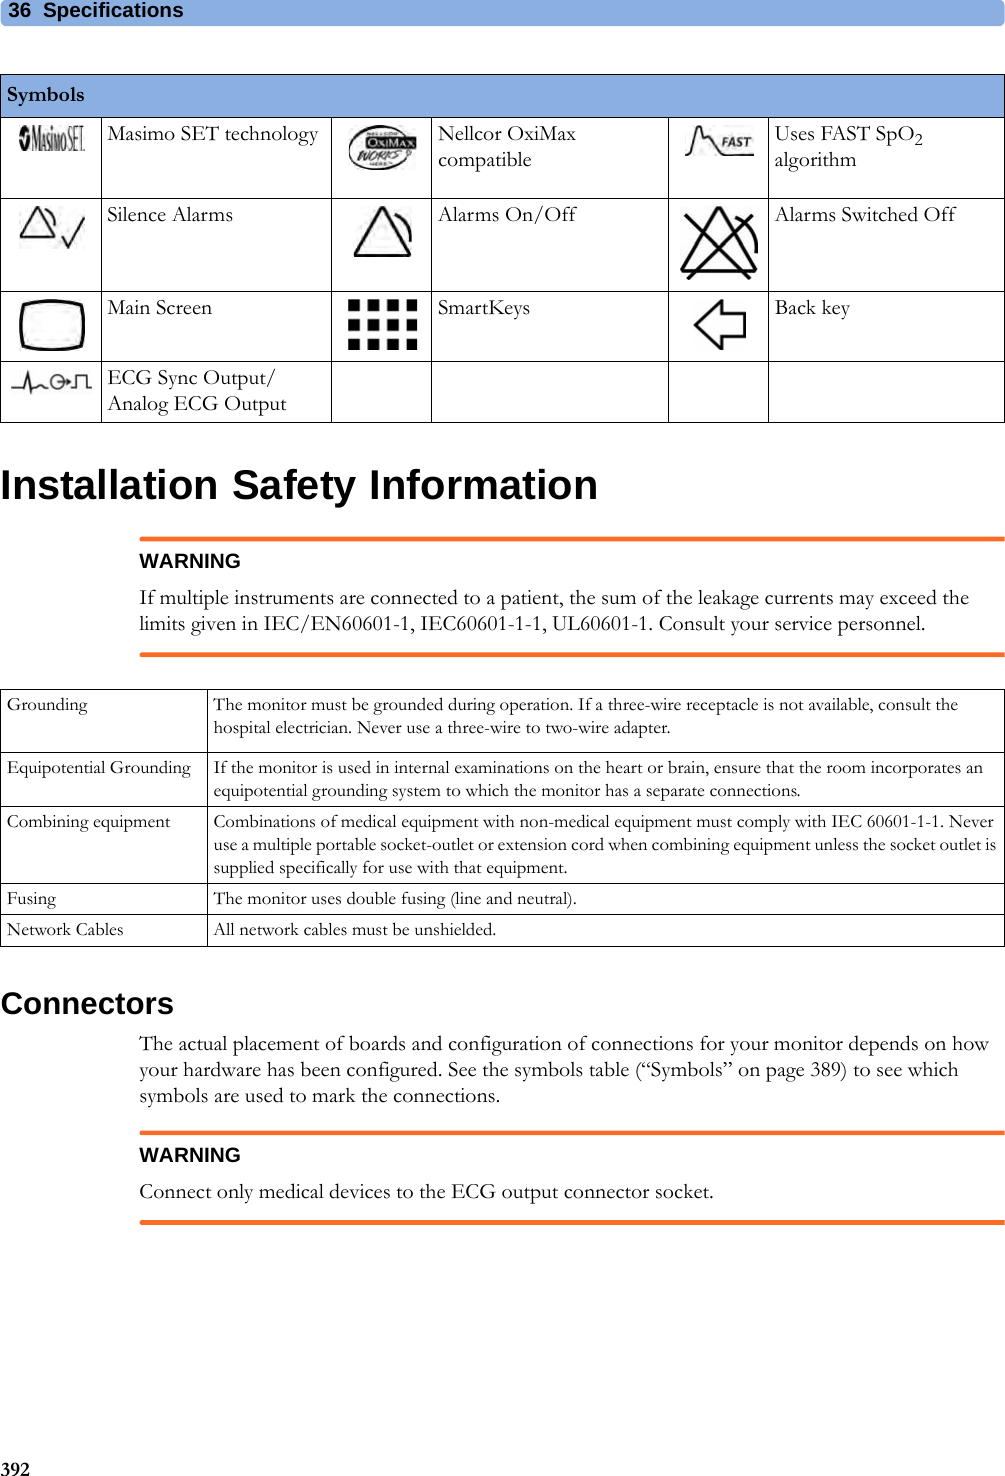 36 Specifications392Installation Safety InformationWARNINGIf multiple instruments are connected to a patient, the sum of the leakage currents may exceed the limits given in IEC/EN60601-1, IEC60601-1-1, UL60601-1. Consult your service personnel.ConnectorsThe actual placement of boards and configuration of connections for your monitor depends on how your hardware has been configured. See the symbols table (“Symbols” on page 389) to see which symbols are used to mark the connections.WARNINGConnect only medical devices to the ECG output connector socket.Masimo SET technology Nellcor OxiMax compatibleUses FAST SpO2 algorithmSilence Alarms Alarms On/Off Alarms Switched OffMain Screen SmartKeys Back keyECG Sync Output/Analog ECG Output SymbolsGrounding The monitor must be grounded during operation. If a three-wire receptacle is not available, consult the hospital electrician. Never use a three-wire to two-wire adapter.Equipotential Grounding If the monitor is used in internal examinations on the heart or brain, ensure that the room incorporates an equipotential grounding system to which the monitor has a separate connections.Combining equipment Combinations of medical equipment with non-medical equipment must comply with IEC 60601-1-1. Never use a multiple portable socket-outlet or extension cord when combining equipment unless the socket outlet is supplied specifically for use with that equipment.Fusing The monitor uses double fusing (line and neutral).Network Cables All network cables must be unshielded.